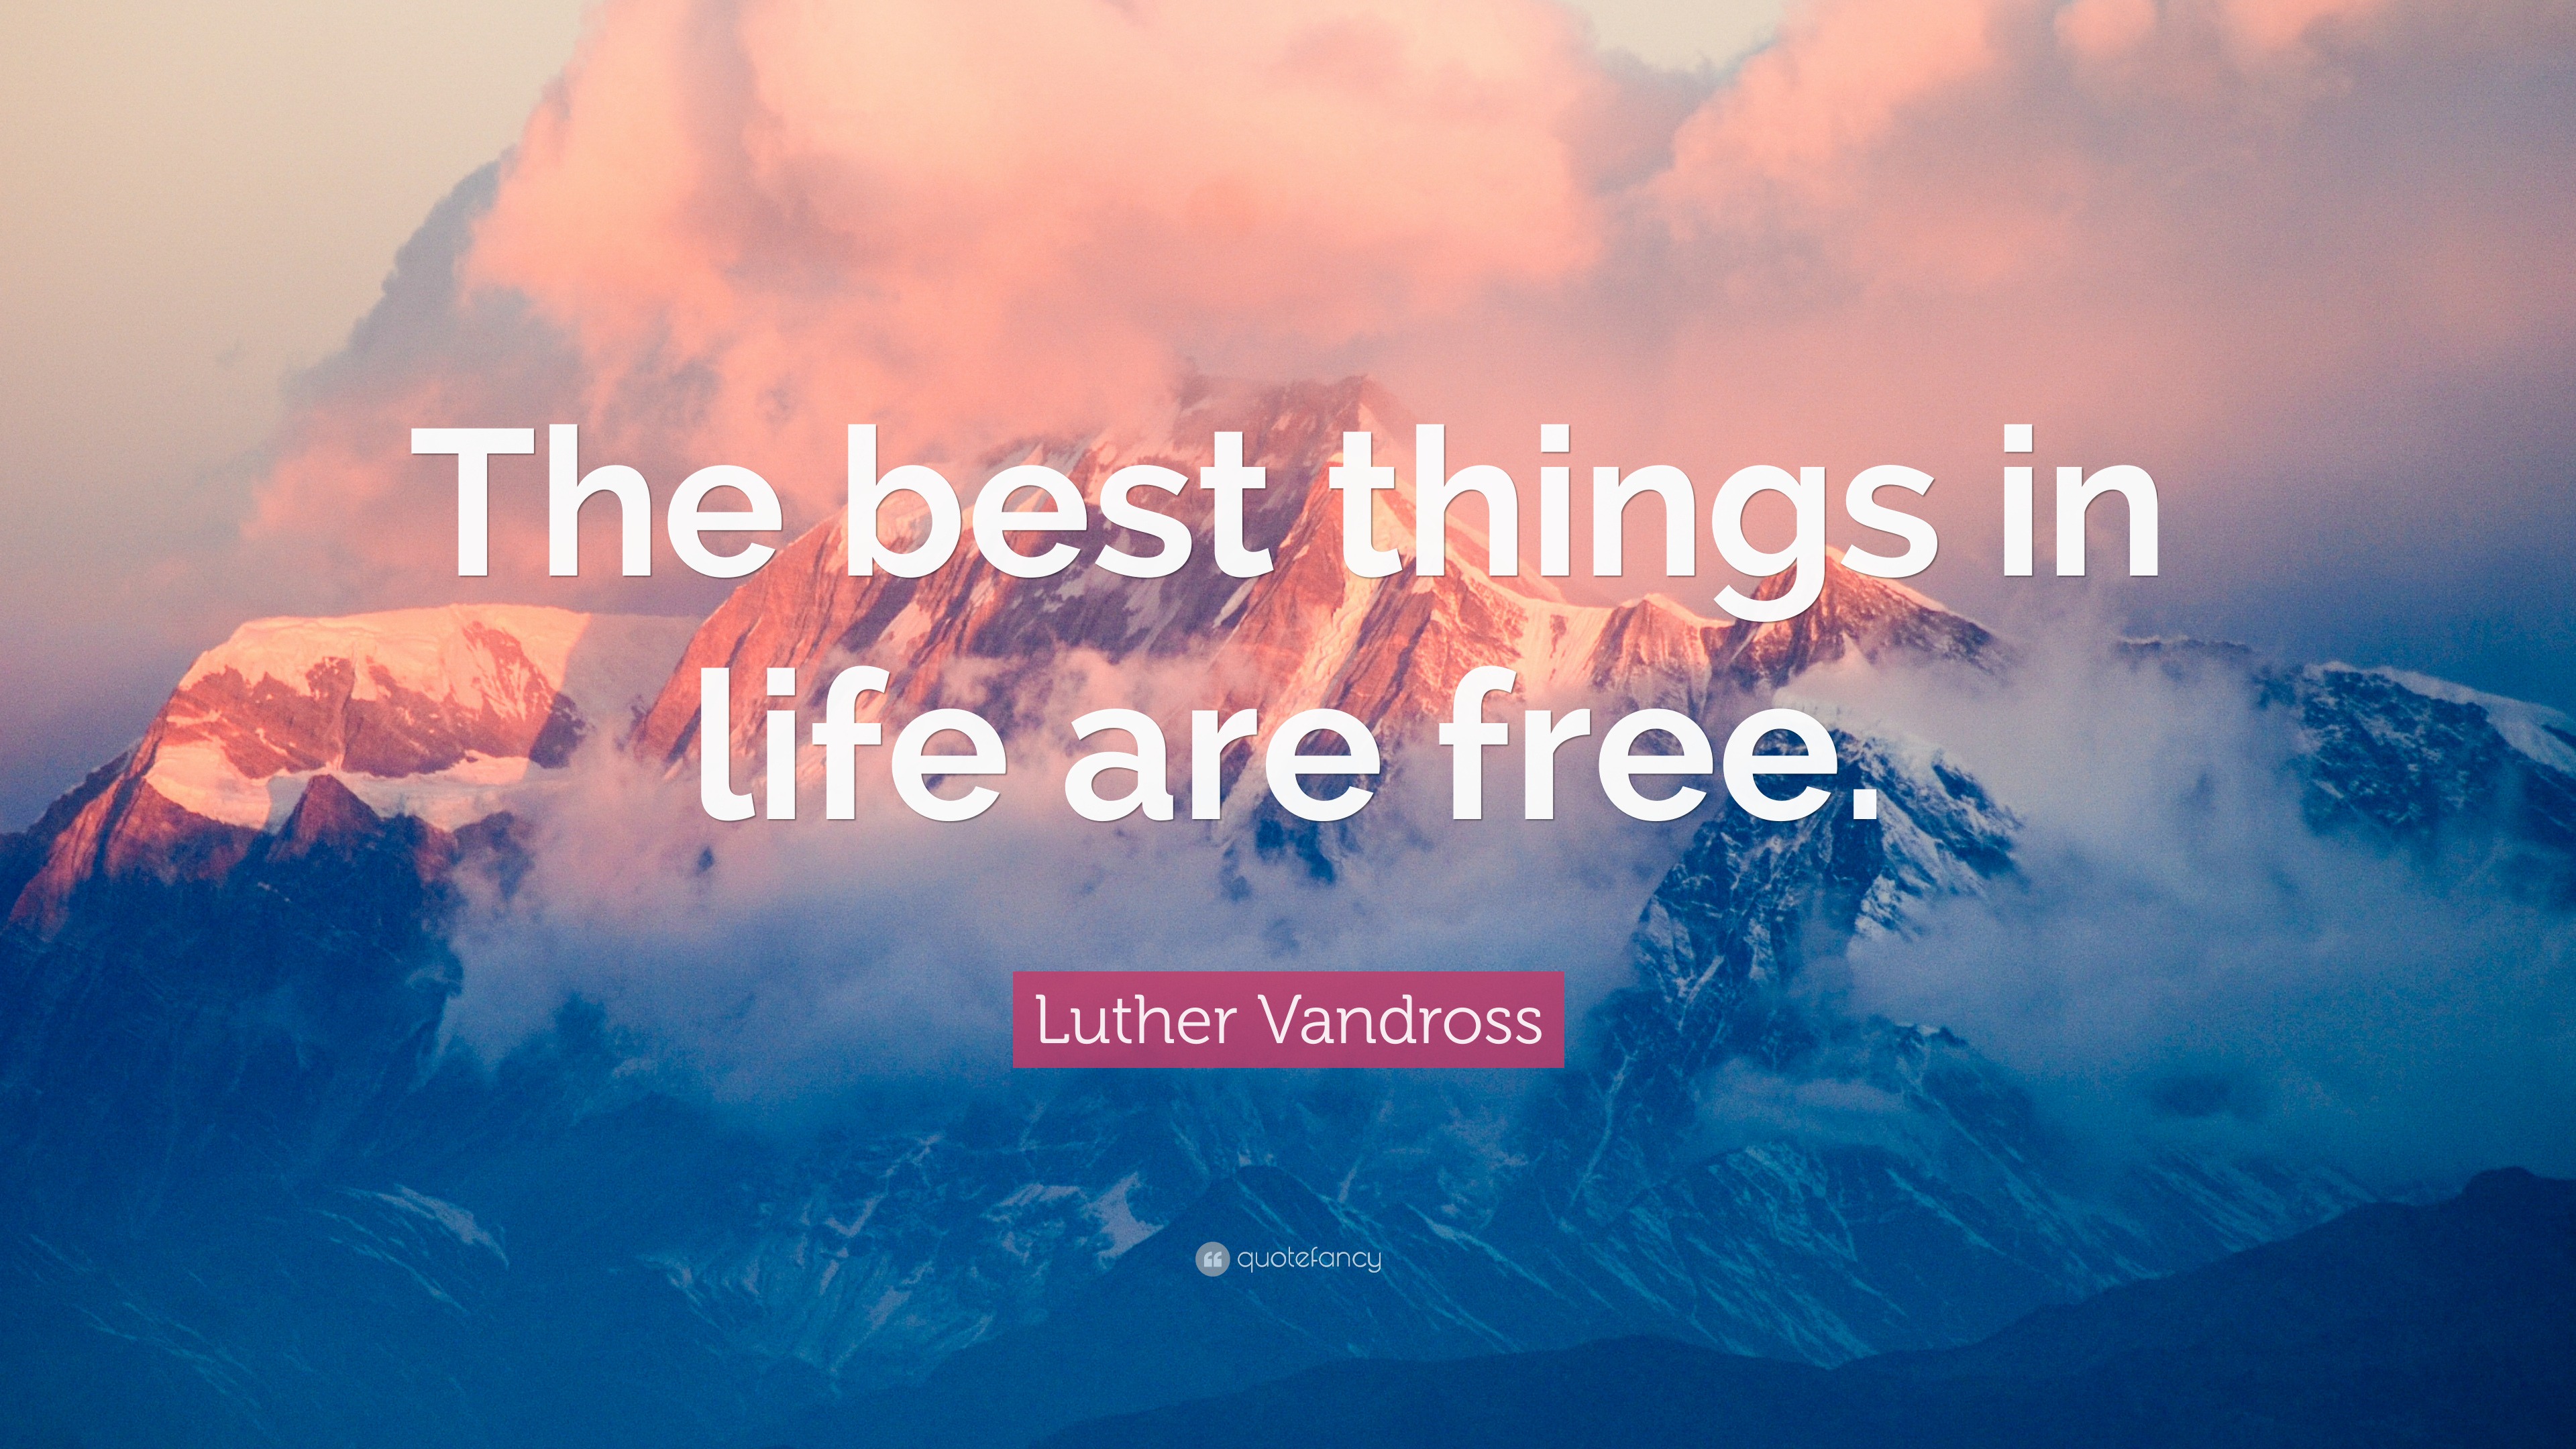 Luther Vandross Quote “The best things in life are free ”